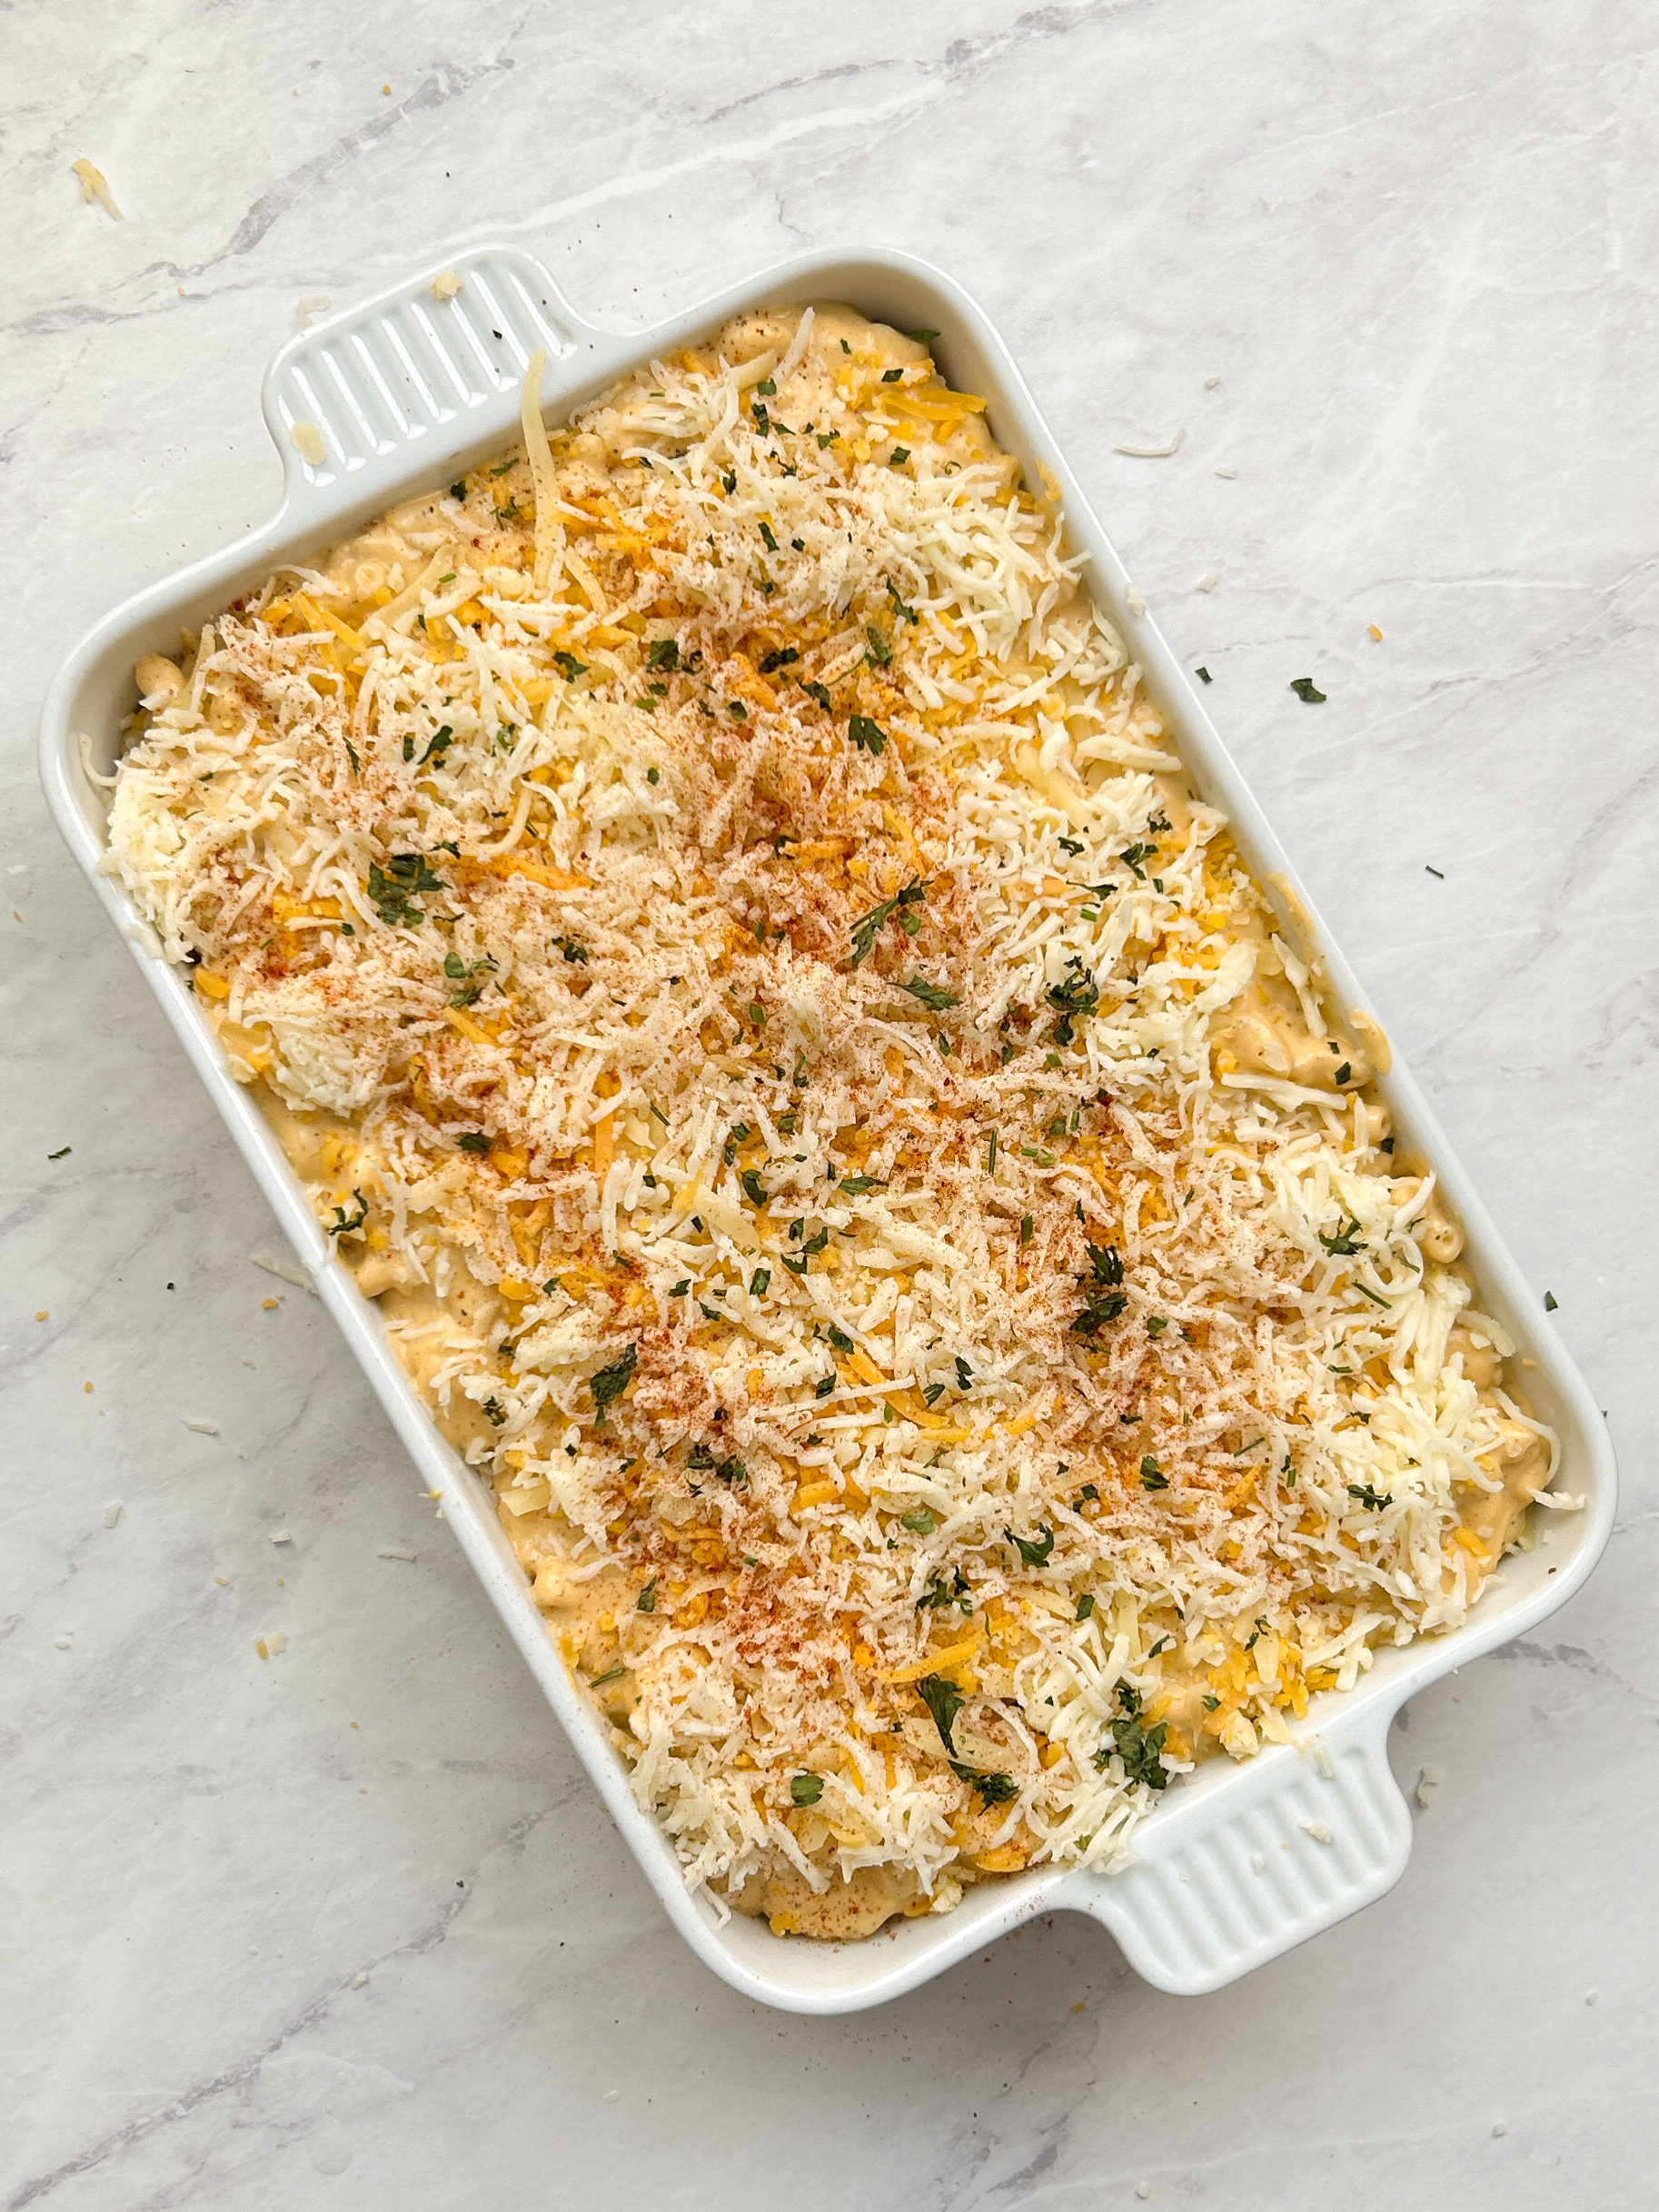 mac and cheese layered in a white casserole dish topped with shredded cheese, parsley and paprika